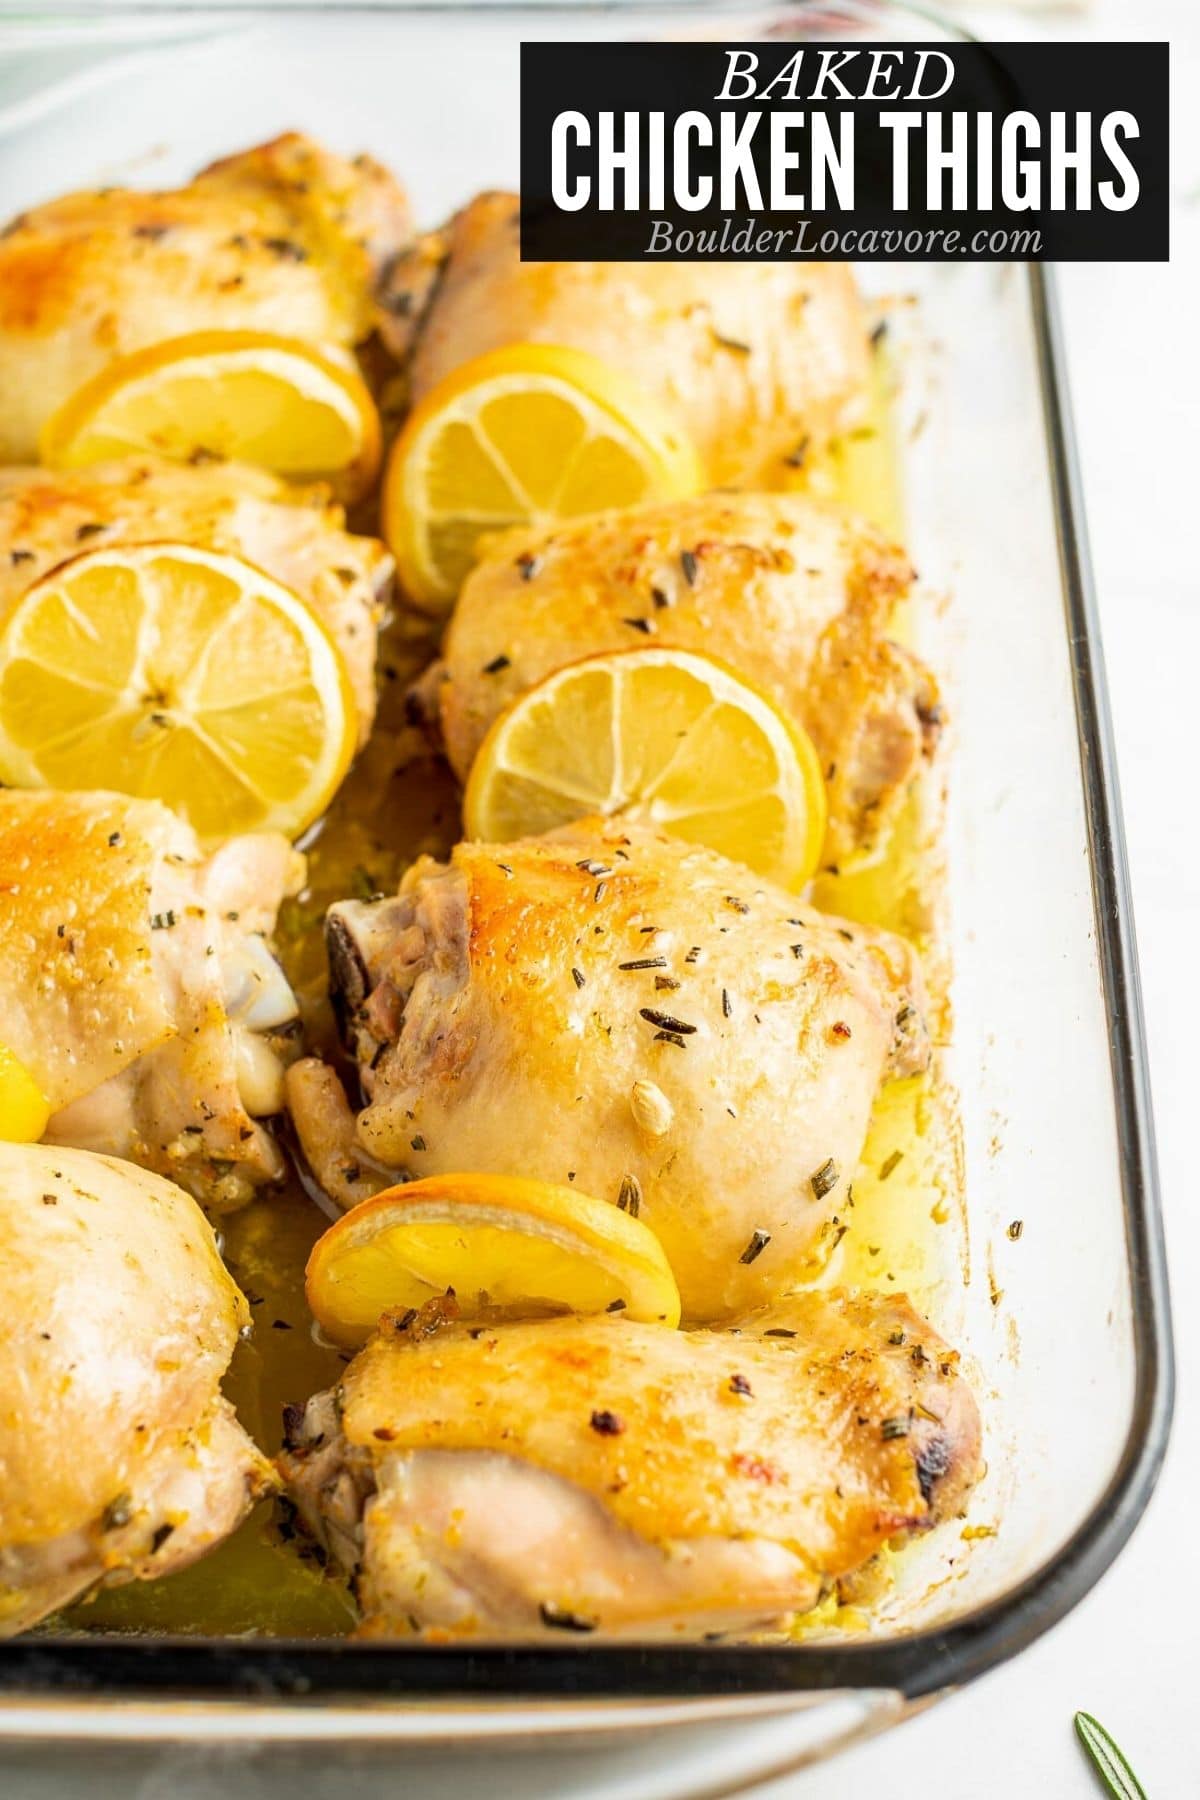 BAKED CHICKEN THIGHS TITLE